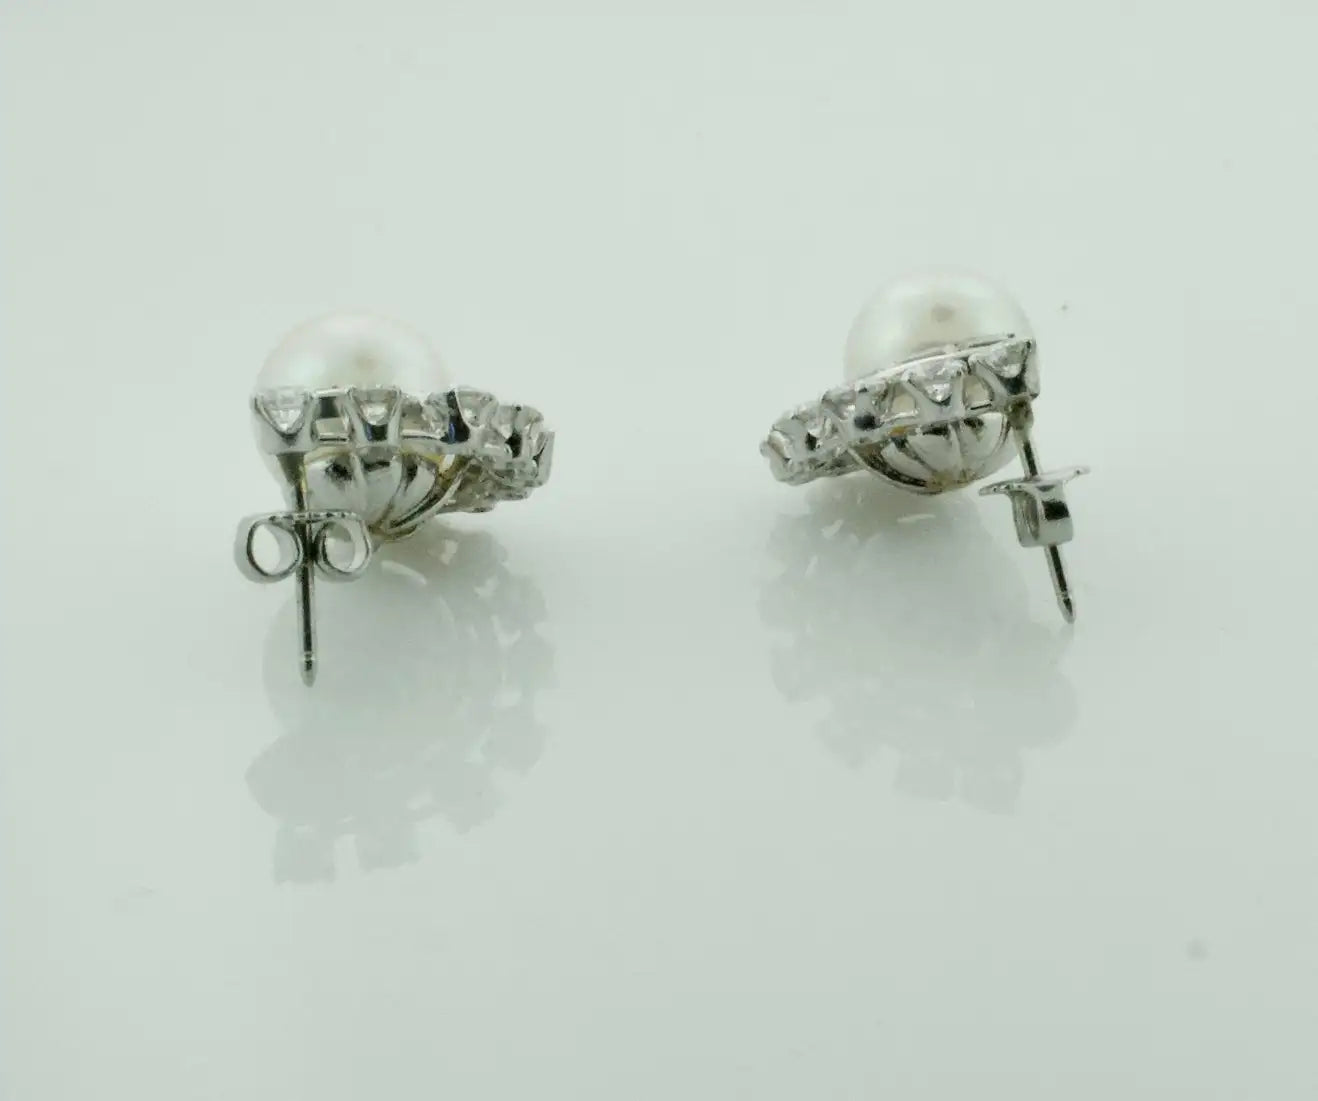 Estate Pearl and Diamond Earring in Platinum circa 1950s, 2.00 Carats